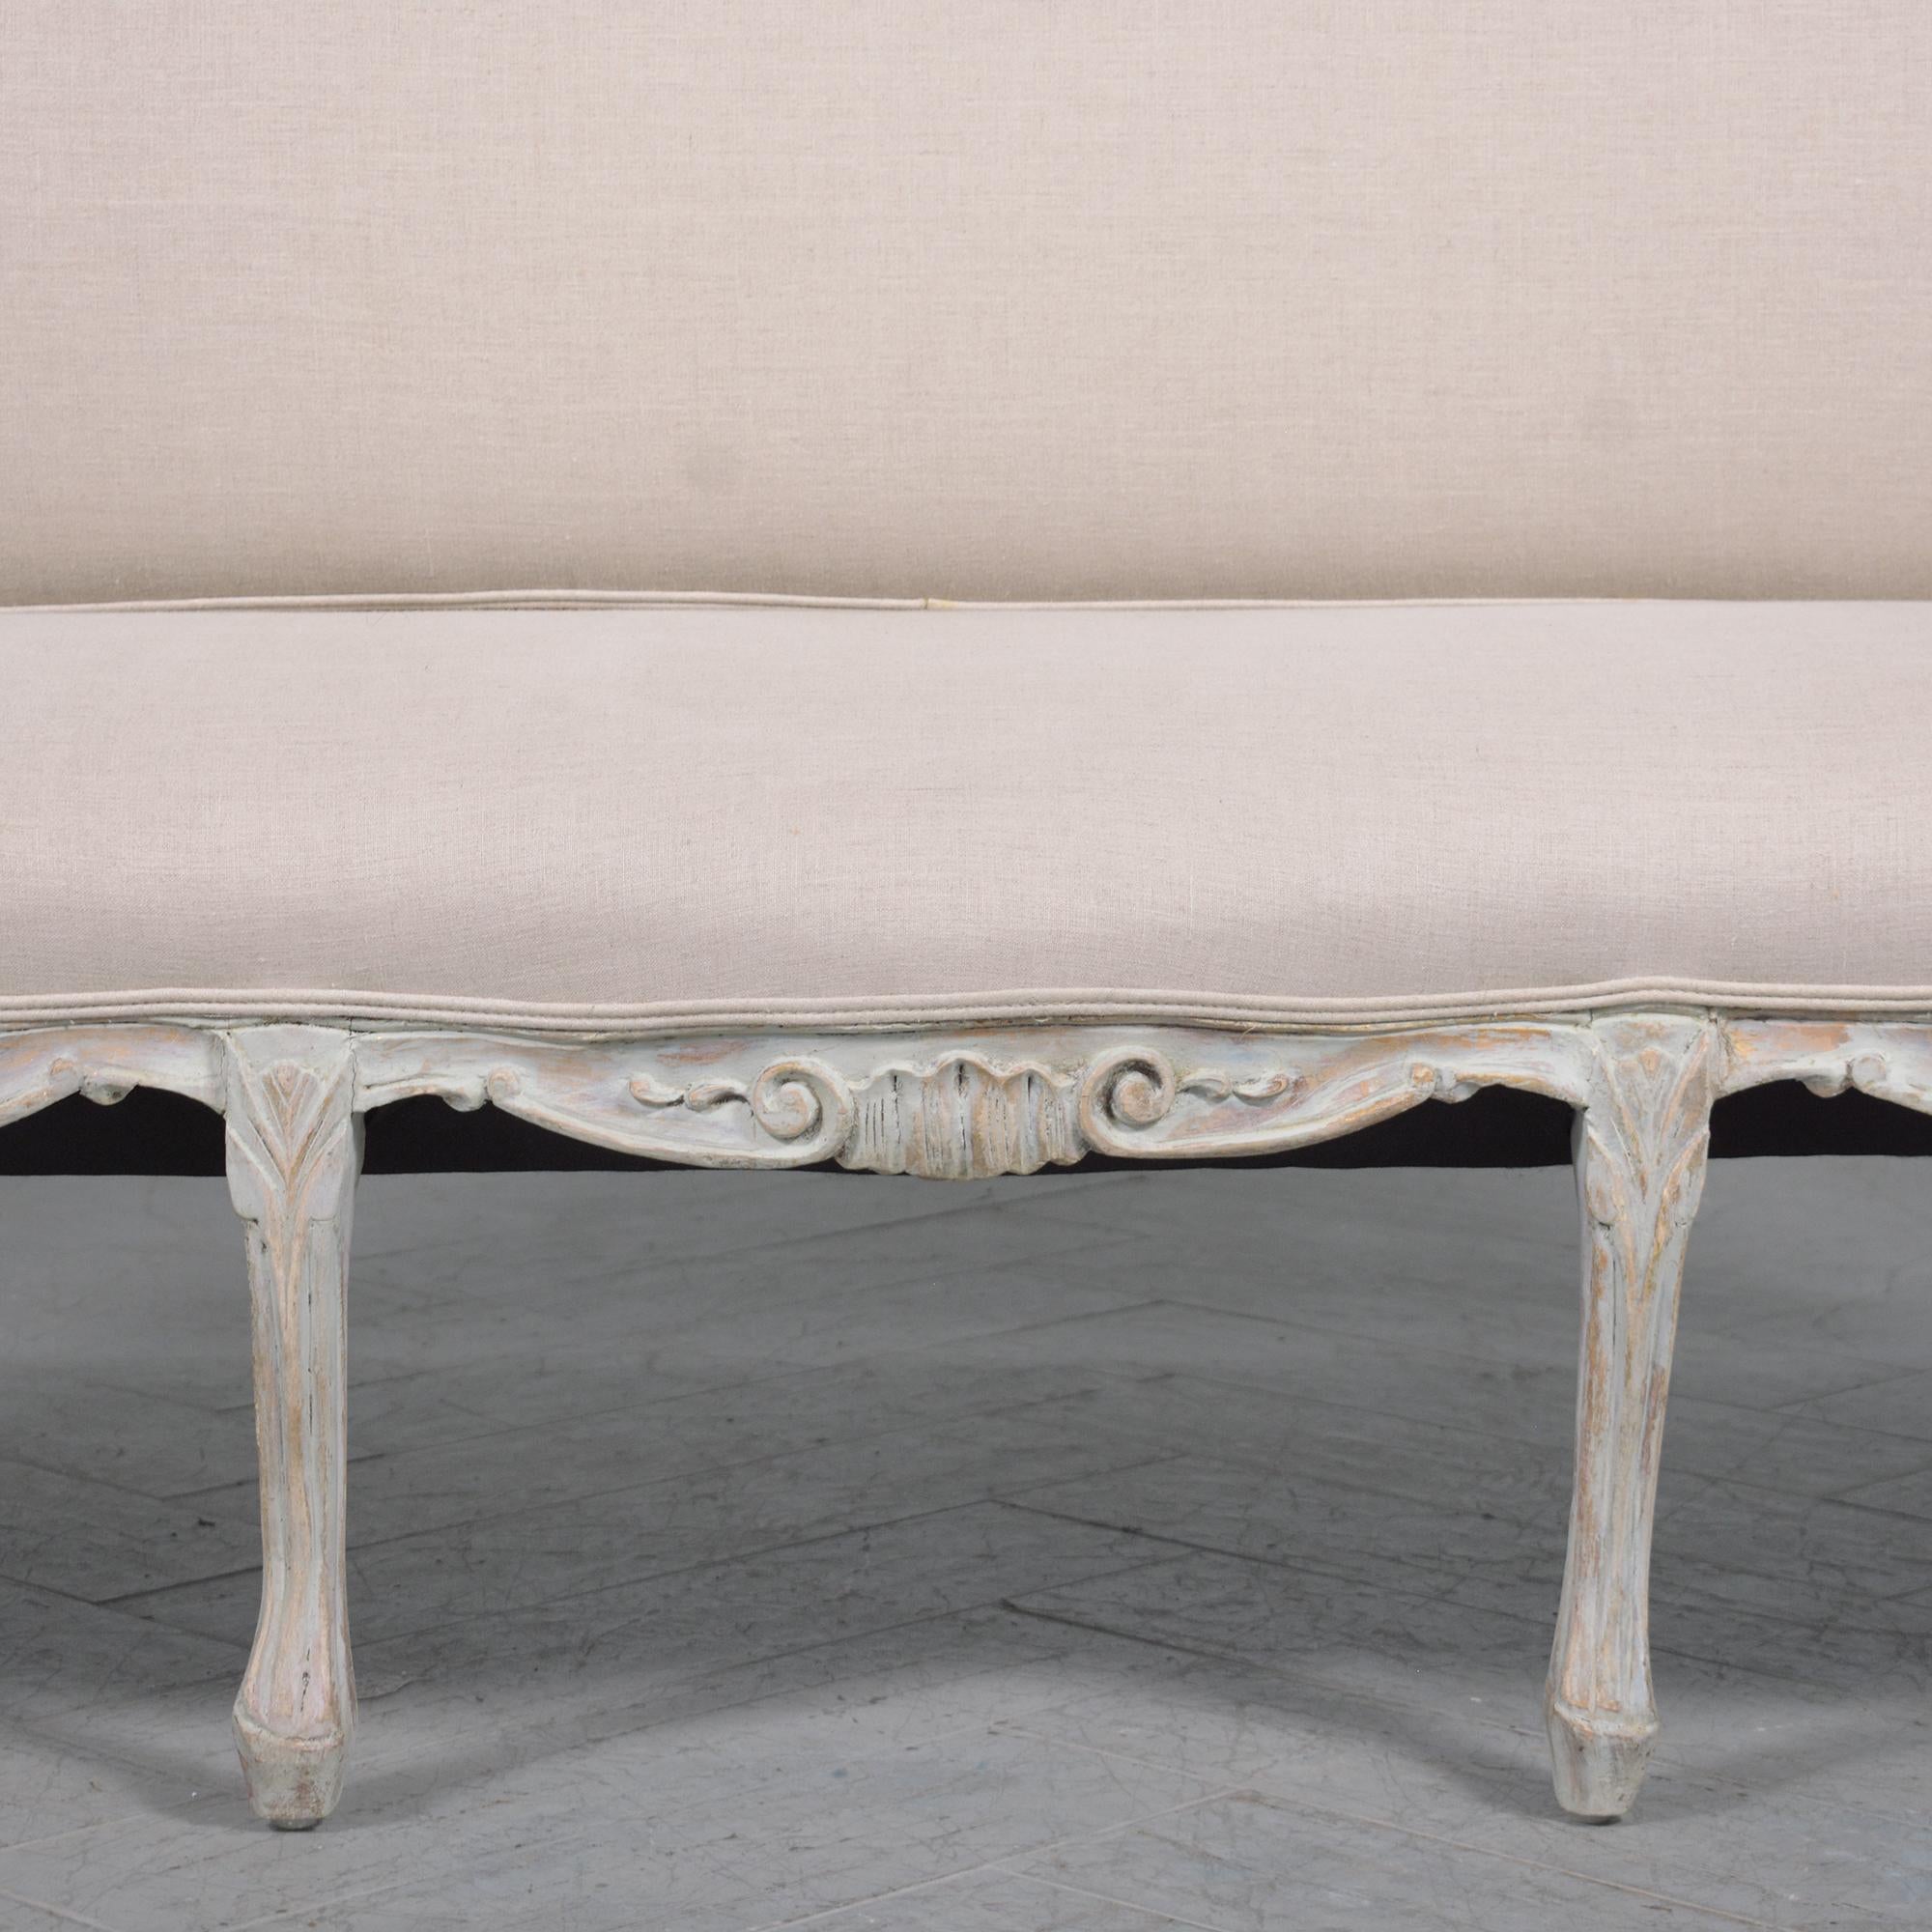 Early 20th Century Restored Early 1900s French Sofa with Hand-Carved Details and Belgian Fabric For Sale